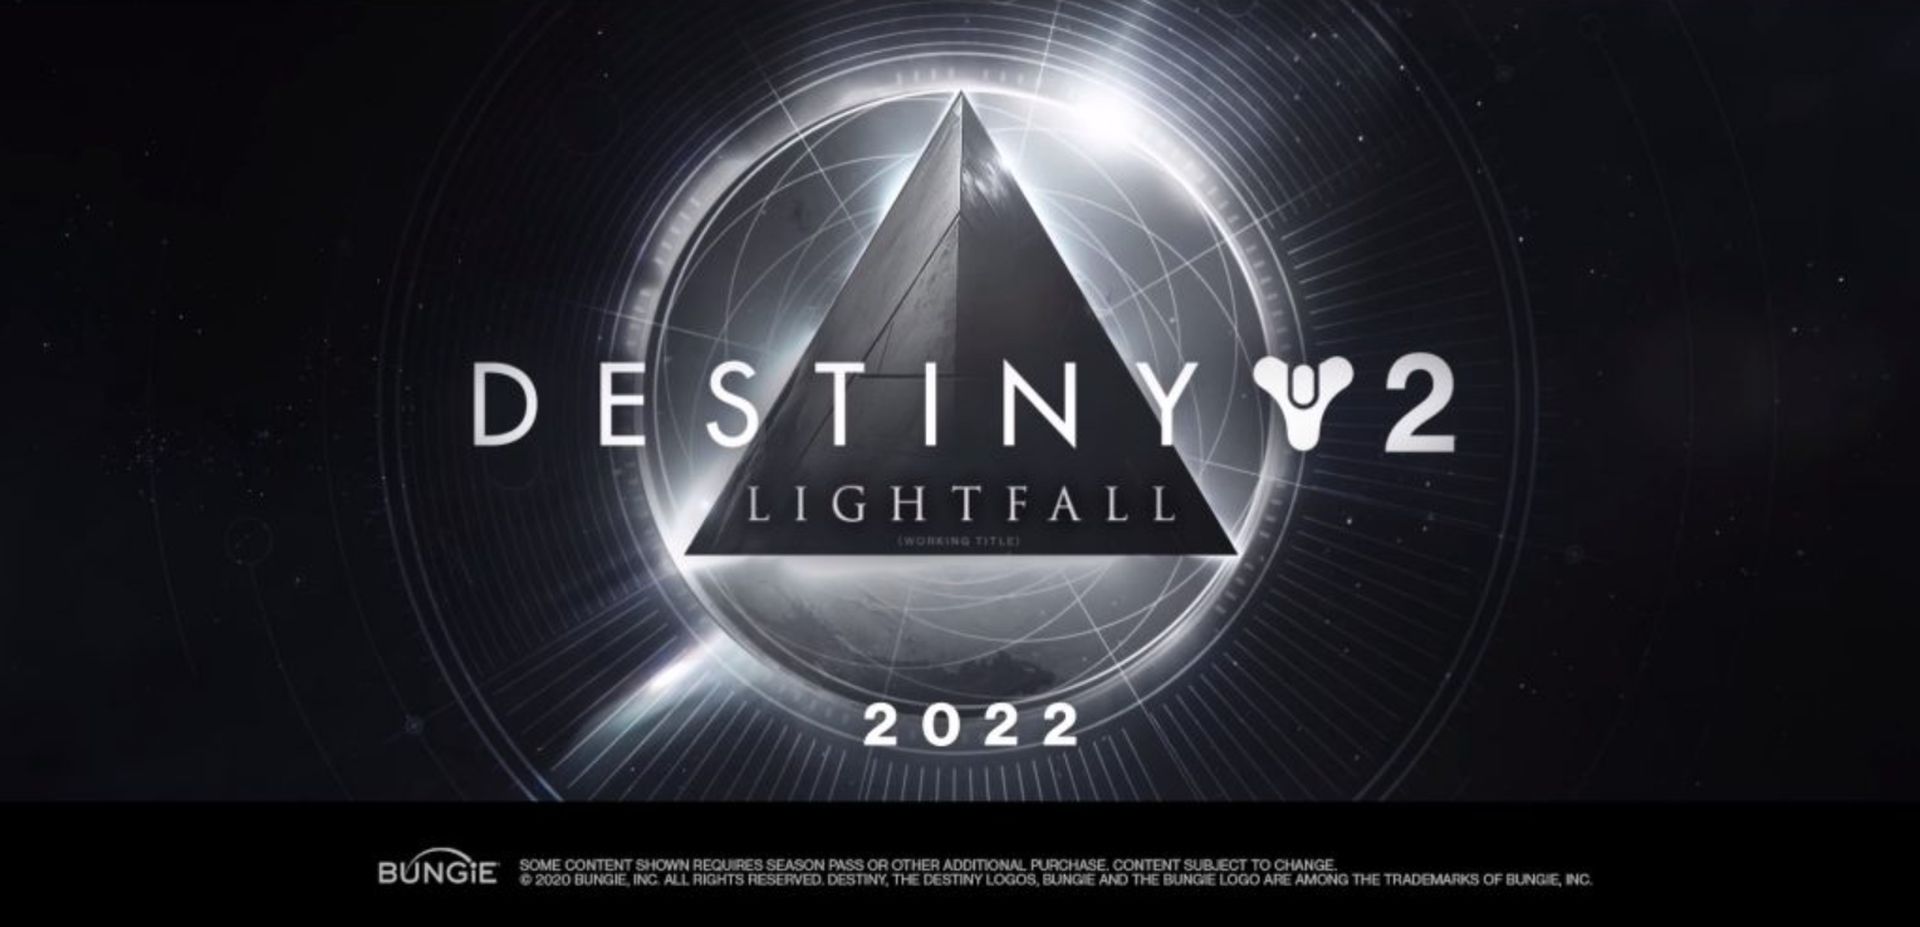 On August 23, 2022, sci-fi MMO developer Bungie will conduct a Destiny 2 showcase with the Lightfall addition serving as the main attraction.